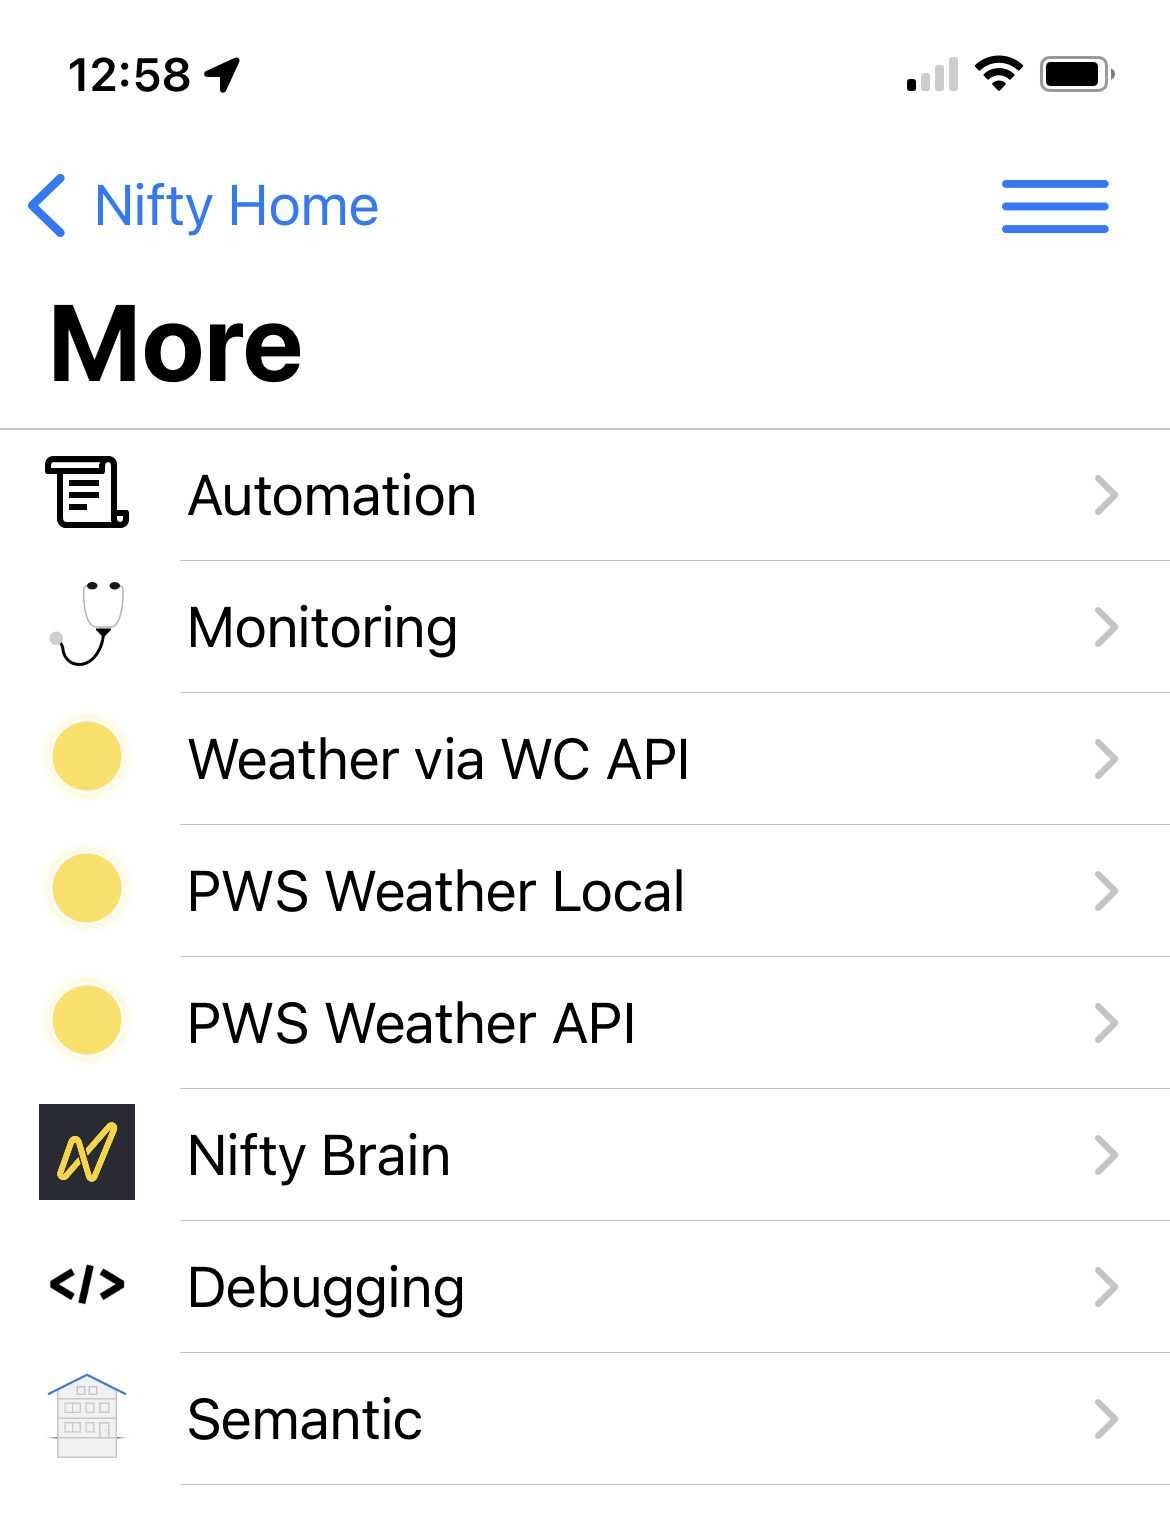 The admin and control section of the Nifty app, located in the More section